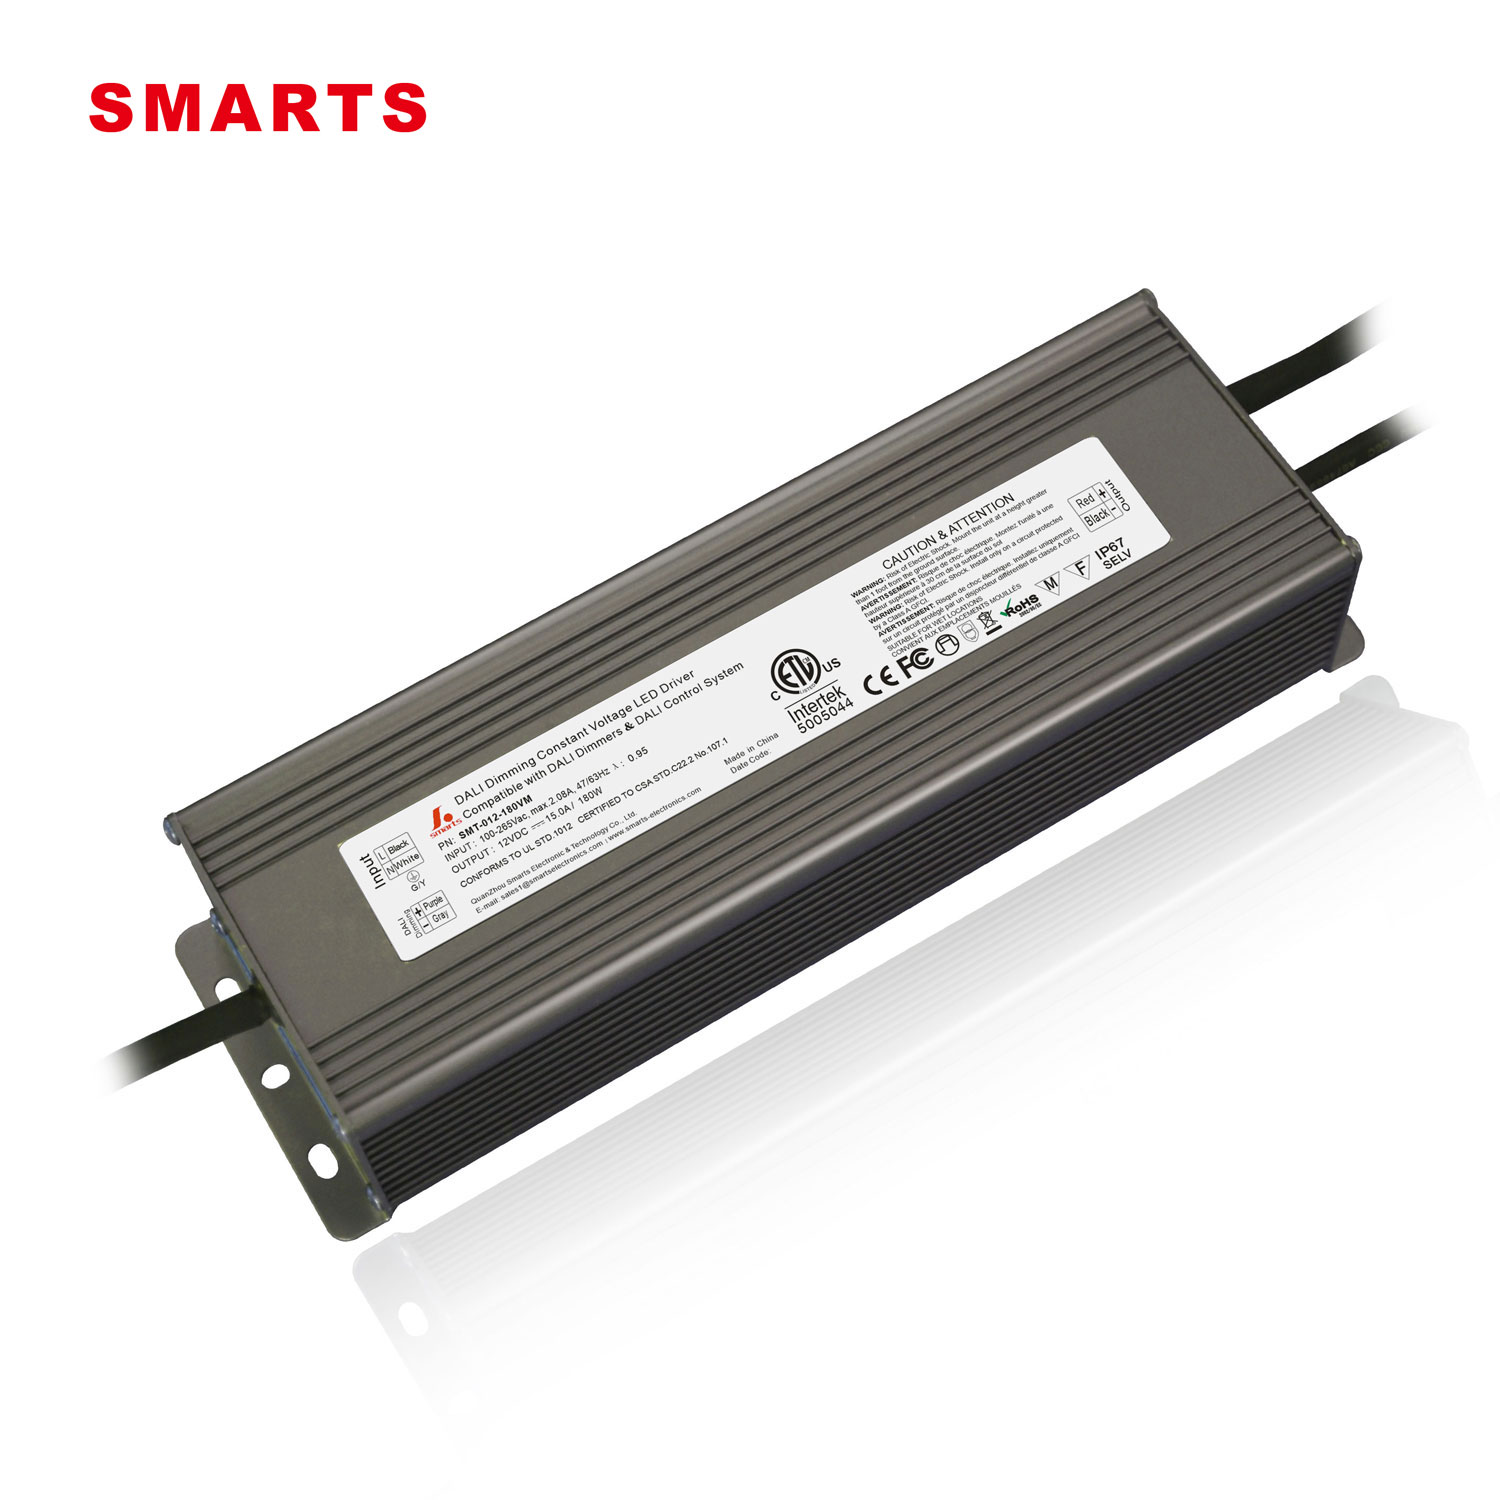 dali dimmable led driver 180w